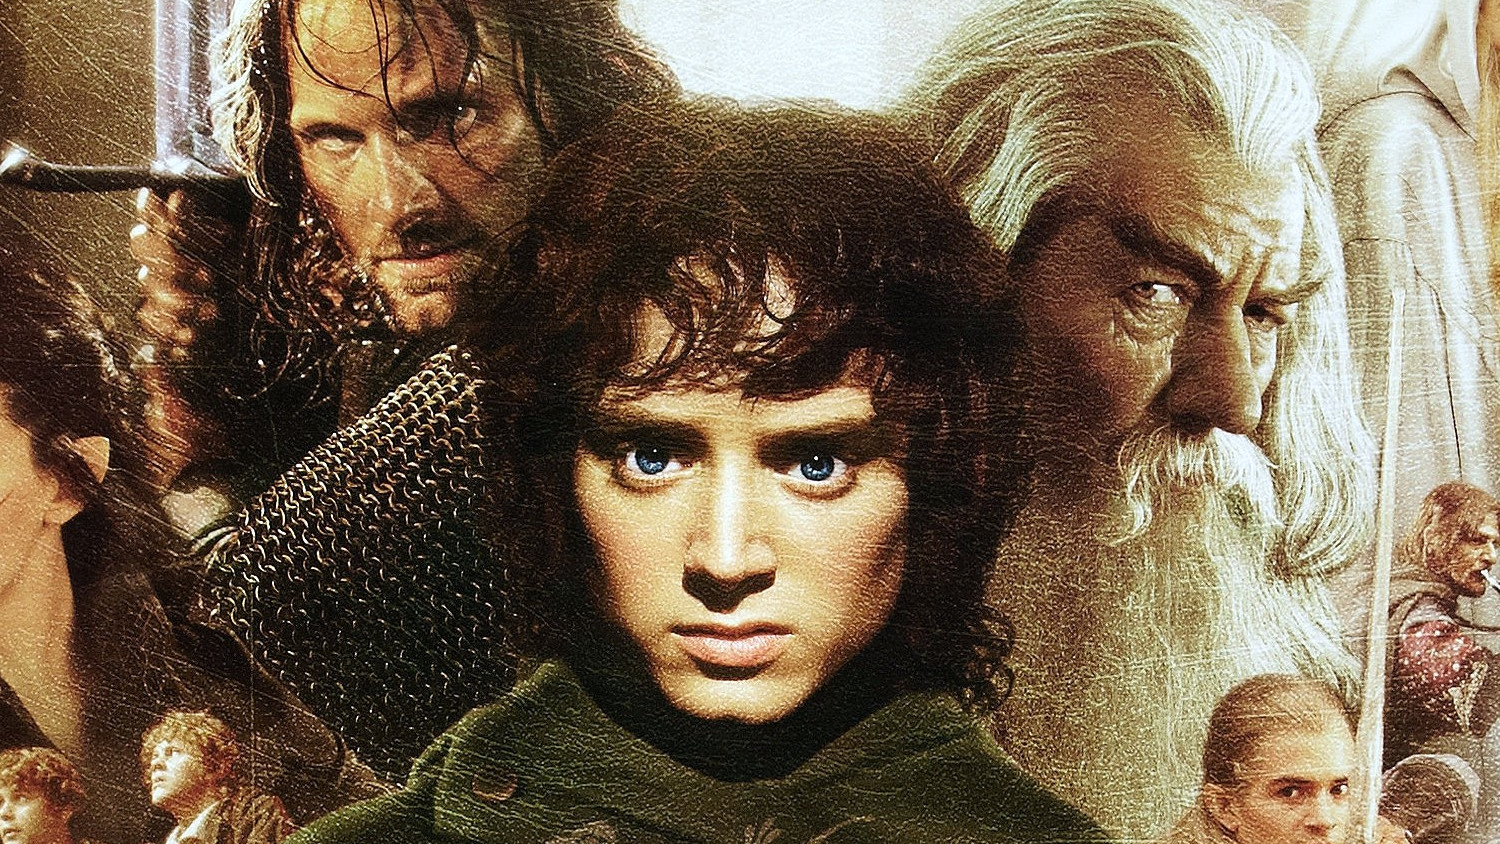 The Lord of the Rings Trilogy Returning To Theaters With Remastered Extended Editions